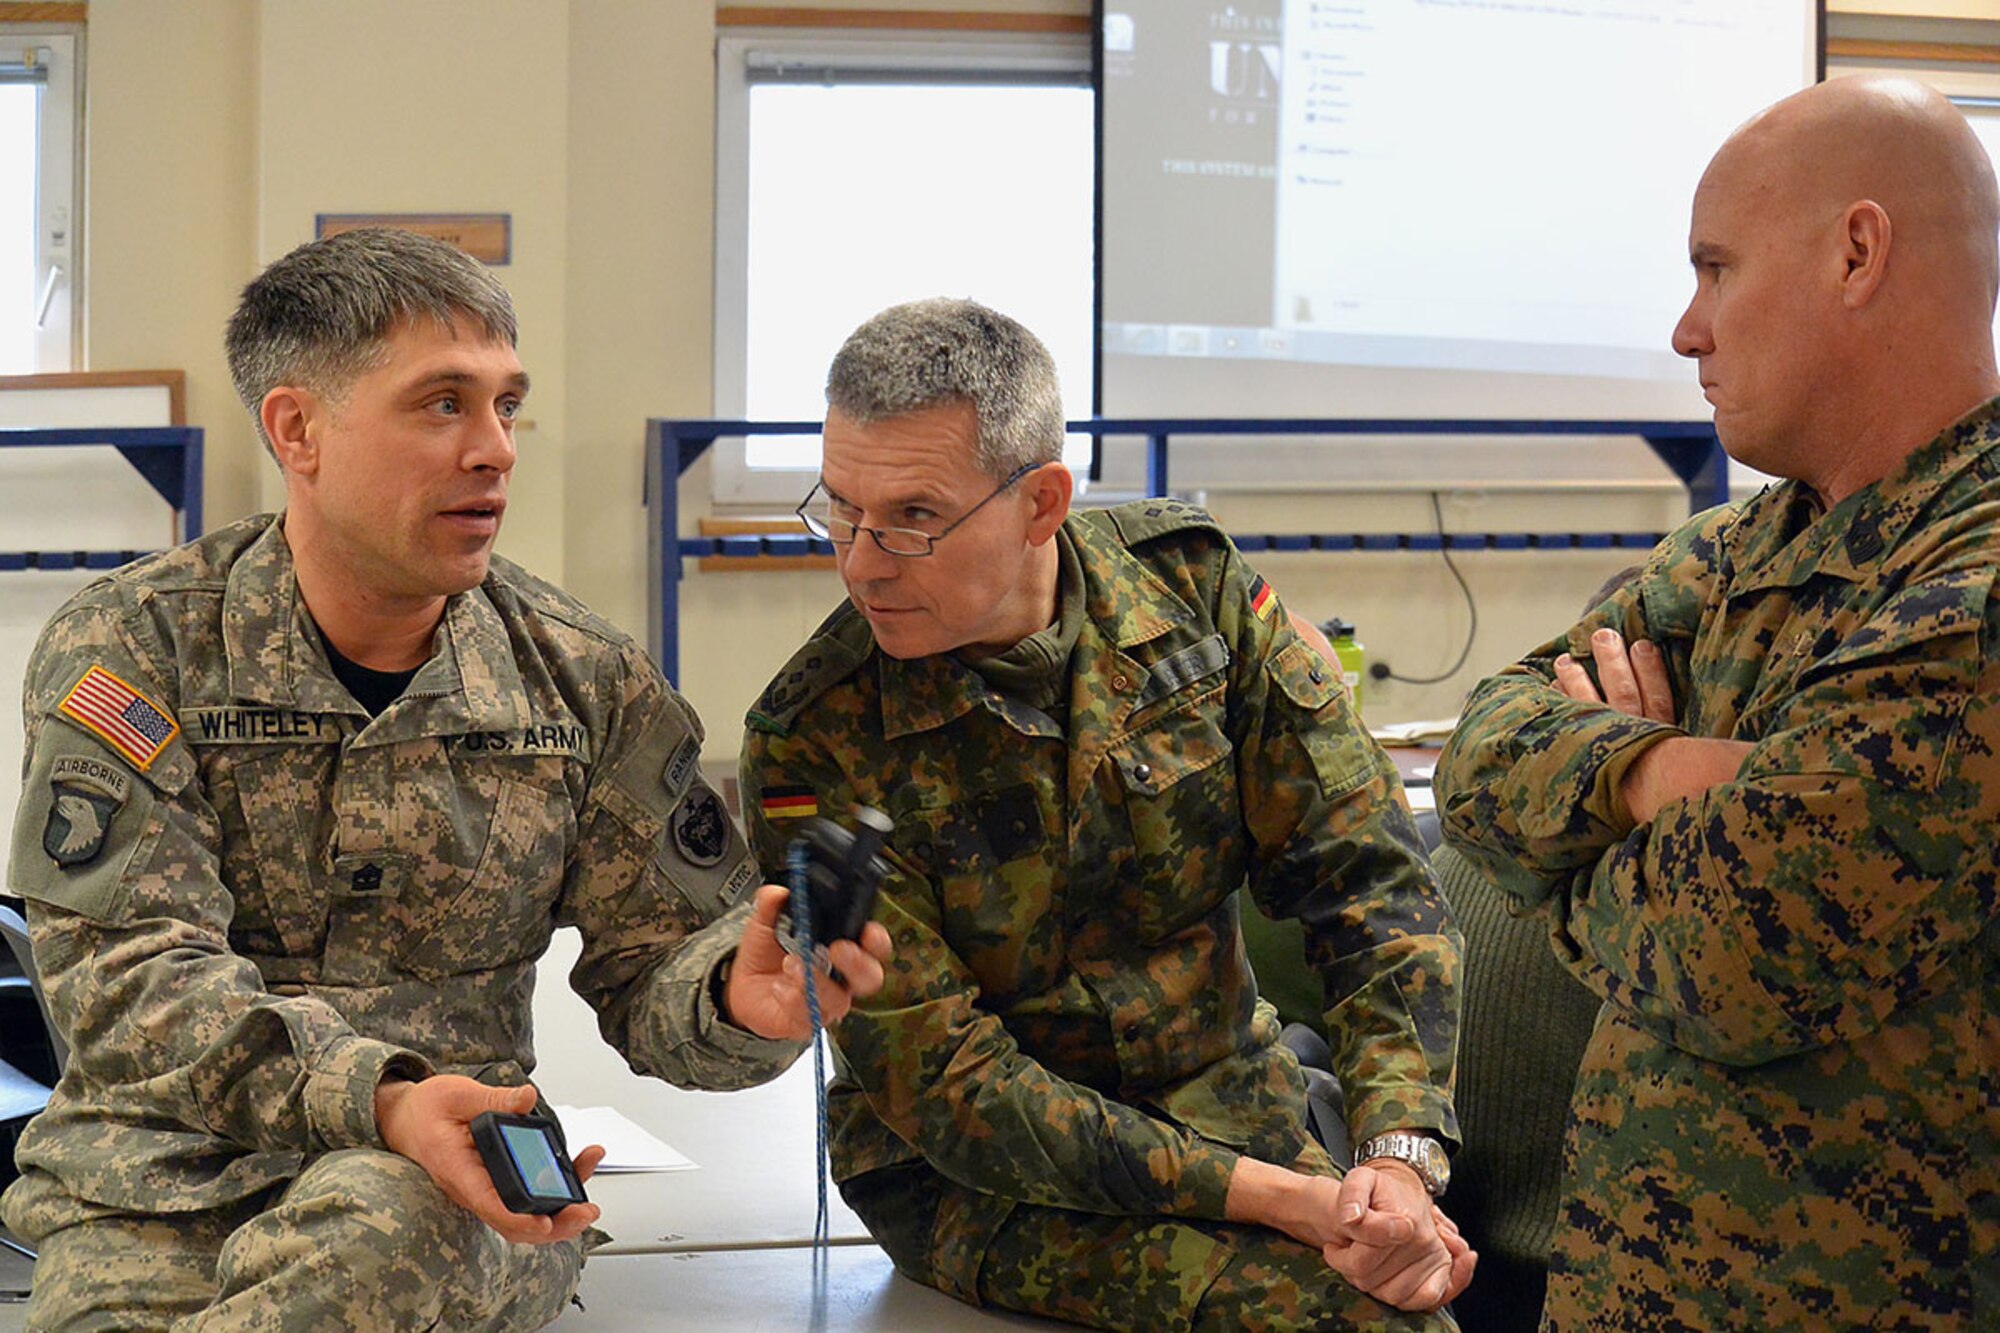 NWTC 1st Sgt. Robert Whiteley discusses his global positioning system with German Col. Michael Varter and U.S. Marine Corps Sgt. Maj. Steven Brunner between presentations at the U.S. Army Alaska-hosted international Cold Region Military Mountaineering Collaborative Event at the Black Rapids Training Site. BRTS was the classroom site Feb. 9 through 12 for participants from 12 nations exchanging ideas about tactics, techniques and procedures for dealing with harsh weather and terrain. (U.S. Army photos/John Pennell)